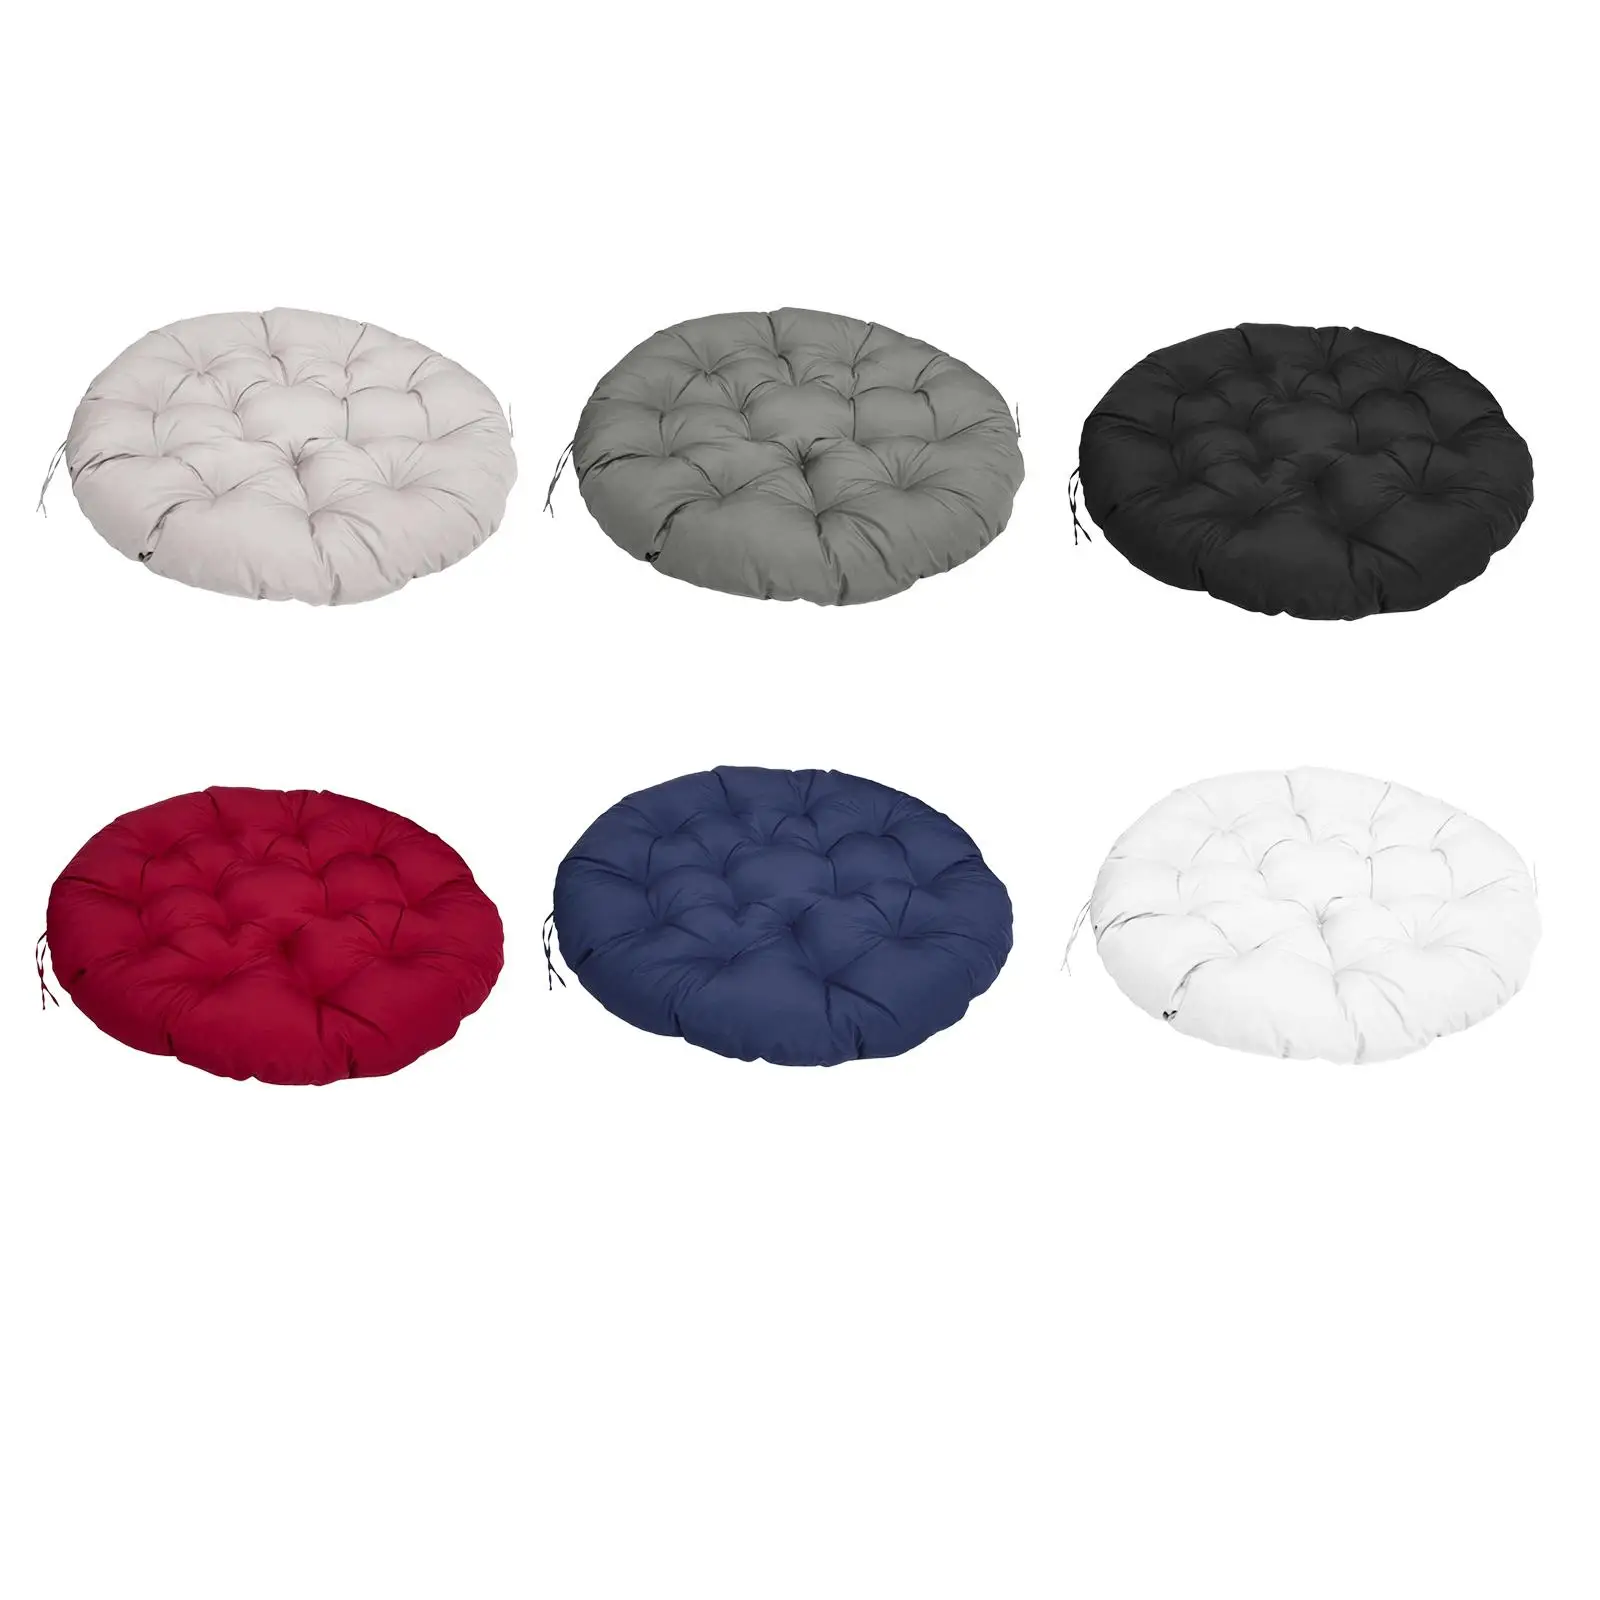 Patio Seat Cushion Water Resistance Thickened Soft Outdoor Seat Cushion for Rocking Chair Rattan Chairs Hanging Chair Bedroom